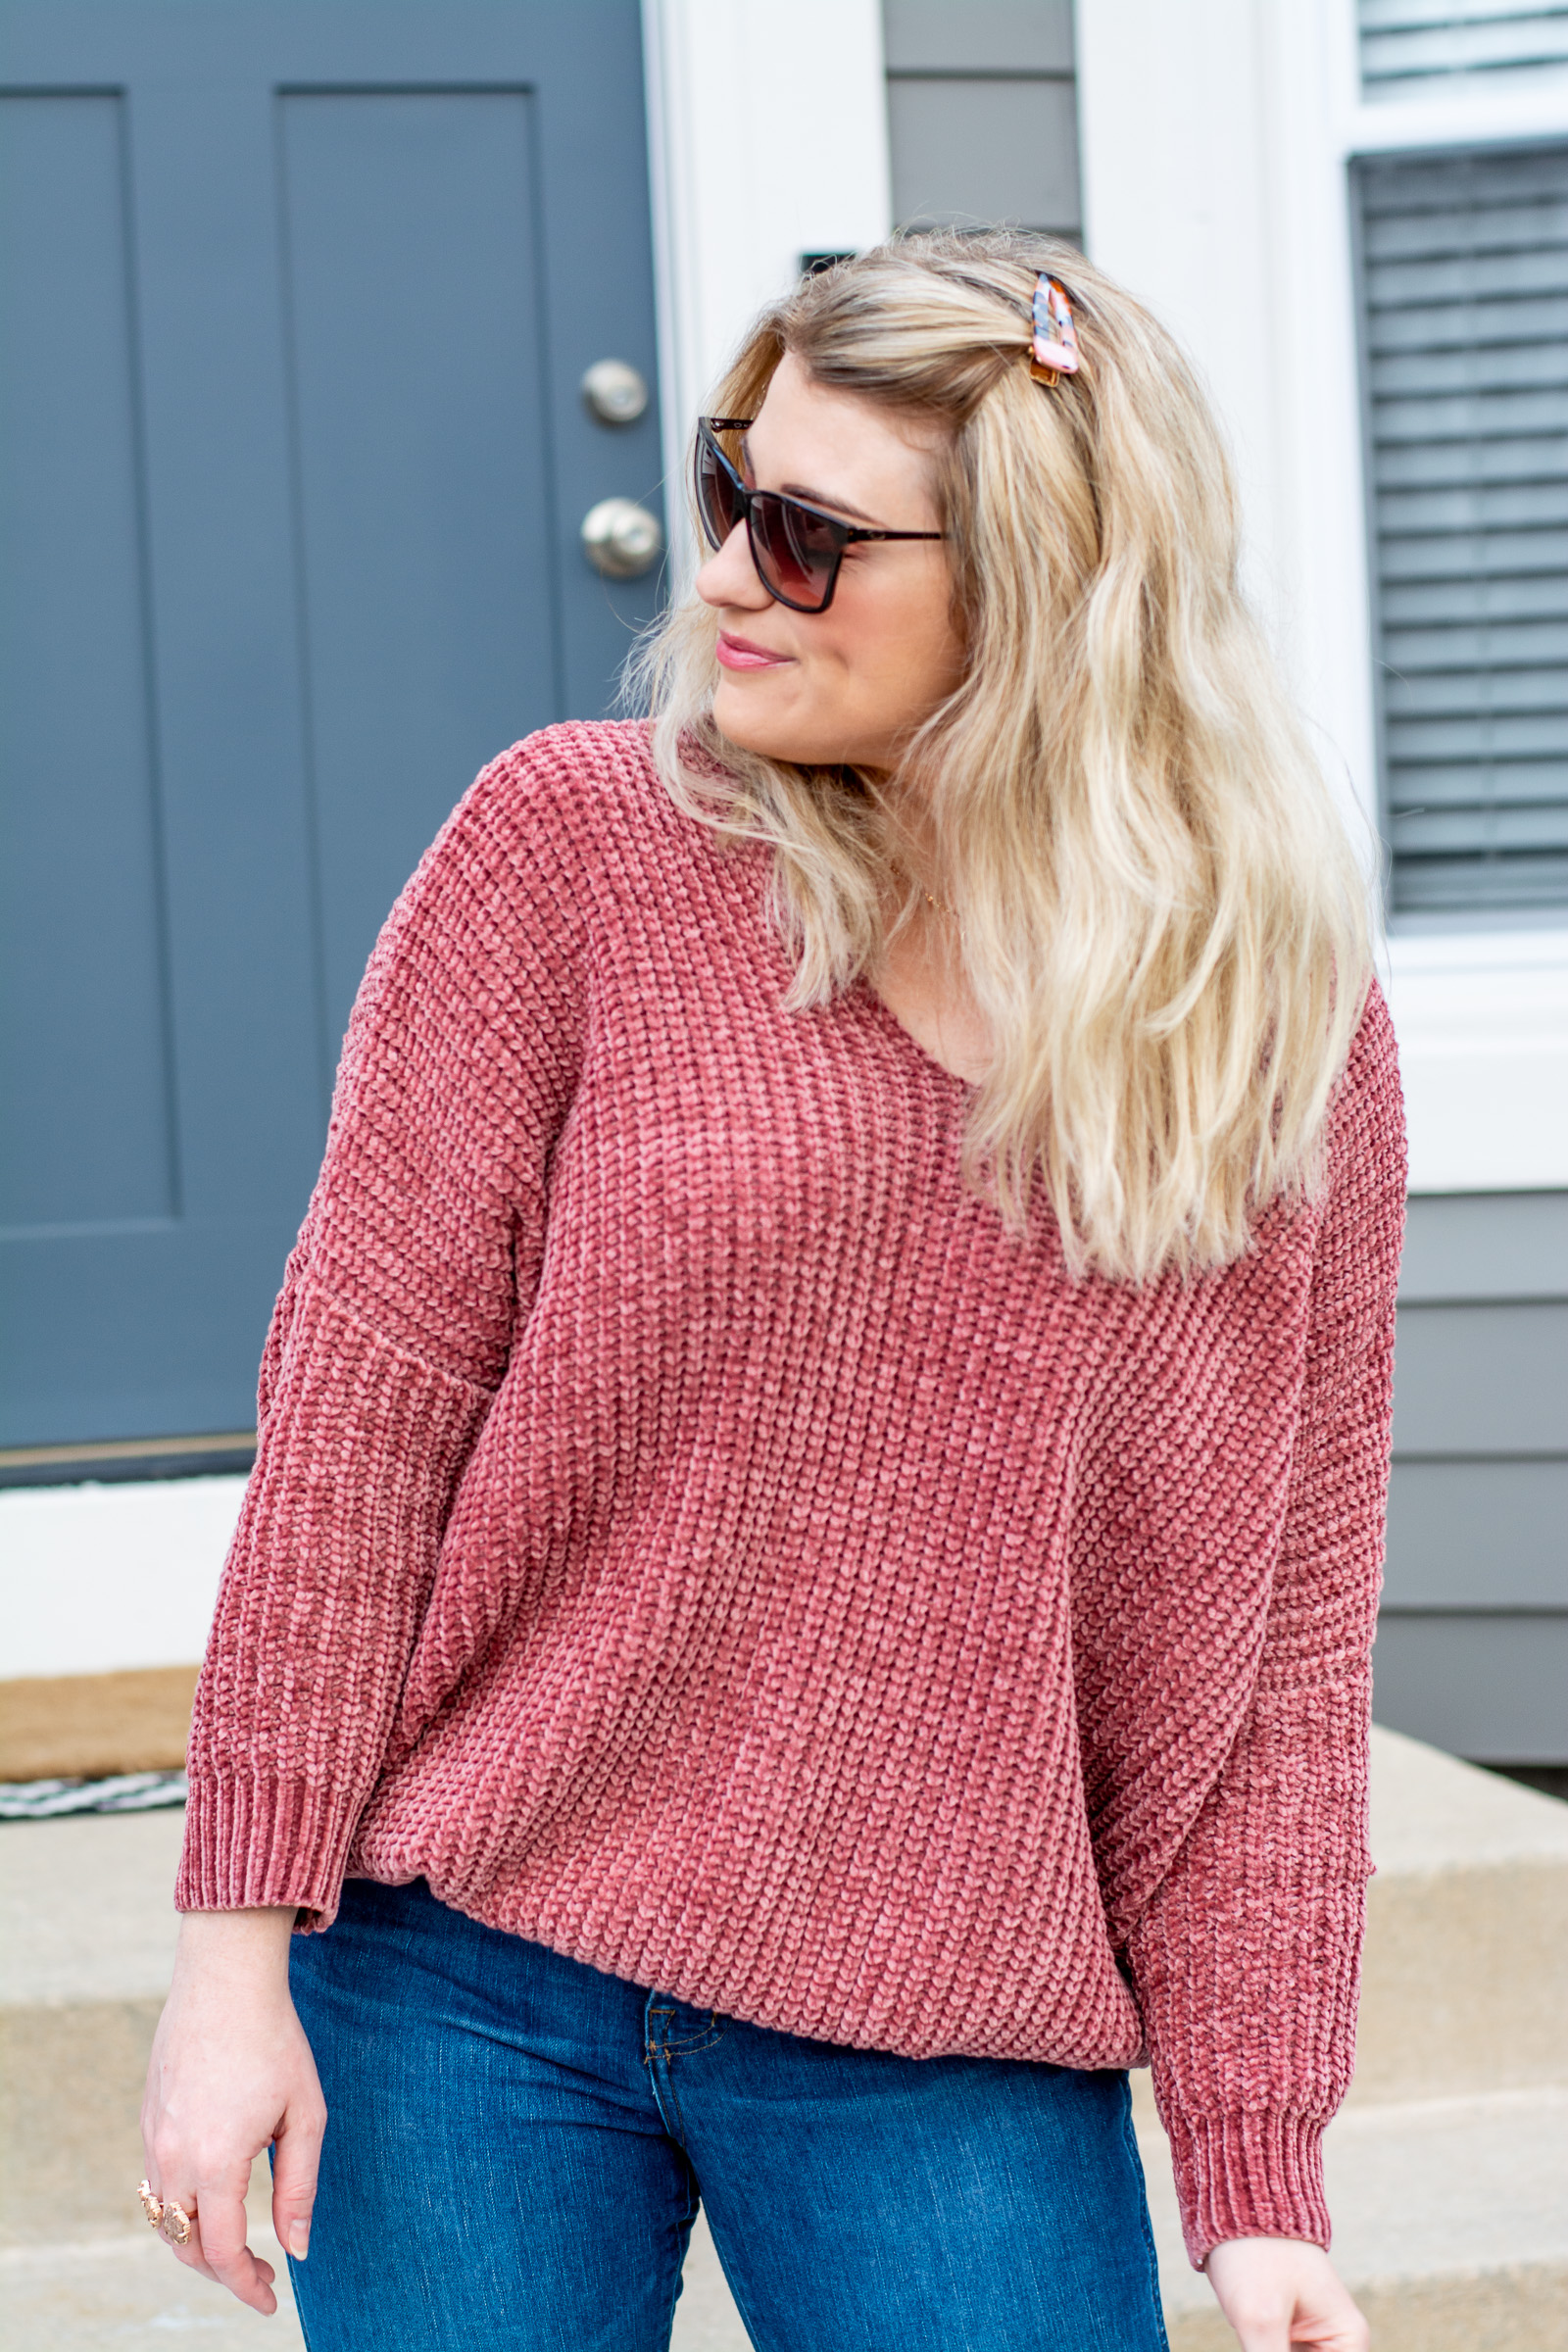 Must-have: Mauve Chenille Pullover. | LSR